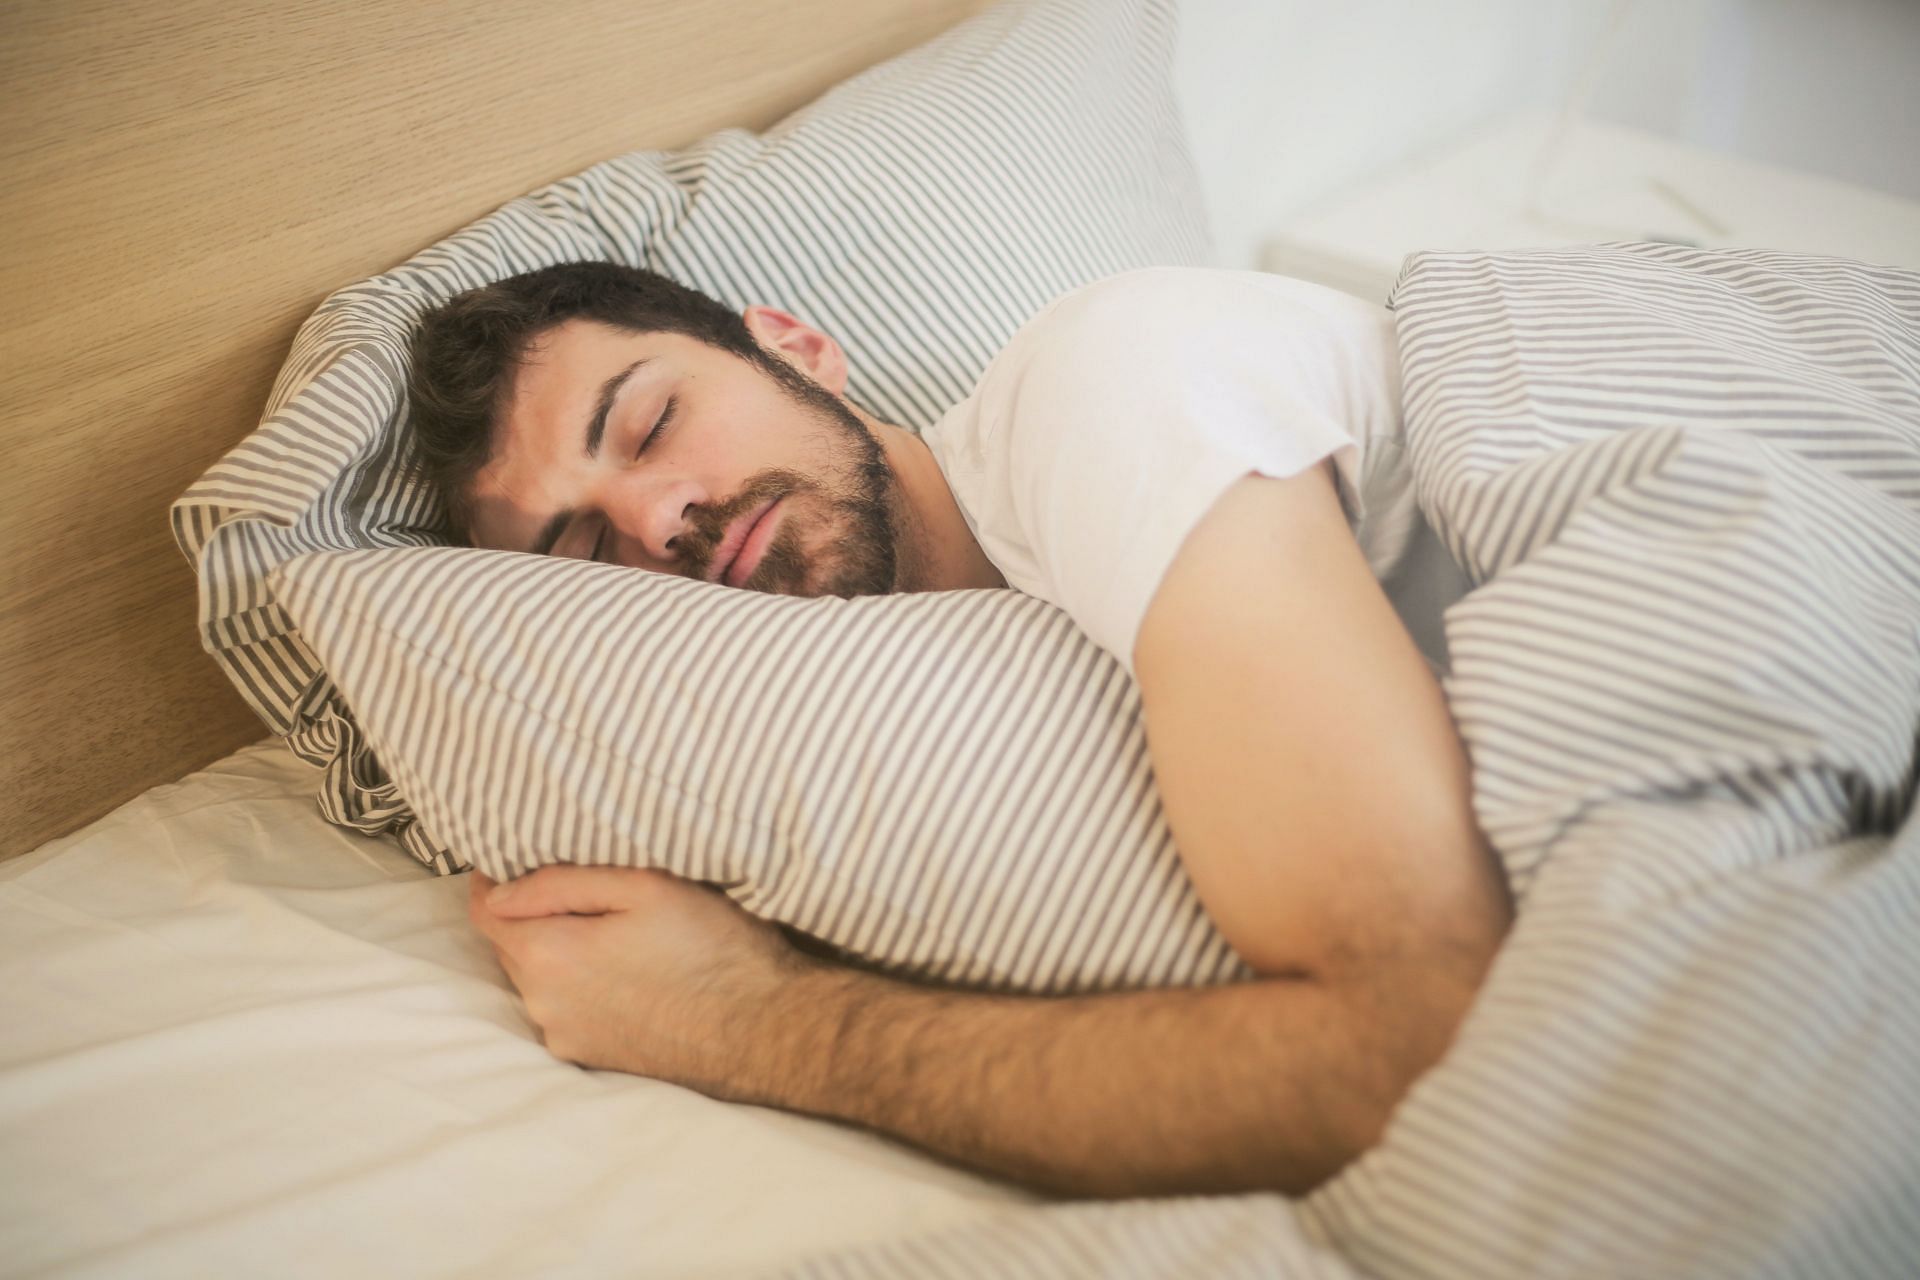 Why do people snore? Sleeping position can be the reason. (Image via Pexels/ Andrea Piacquadio)